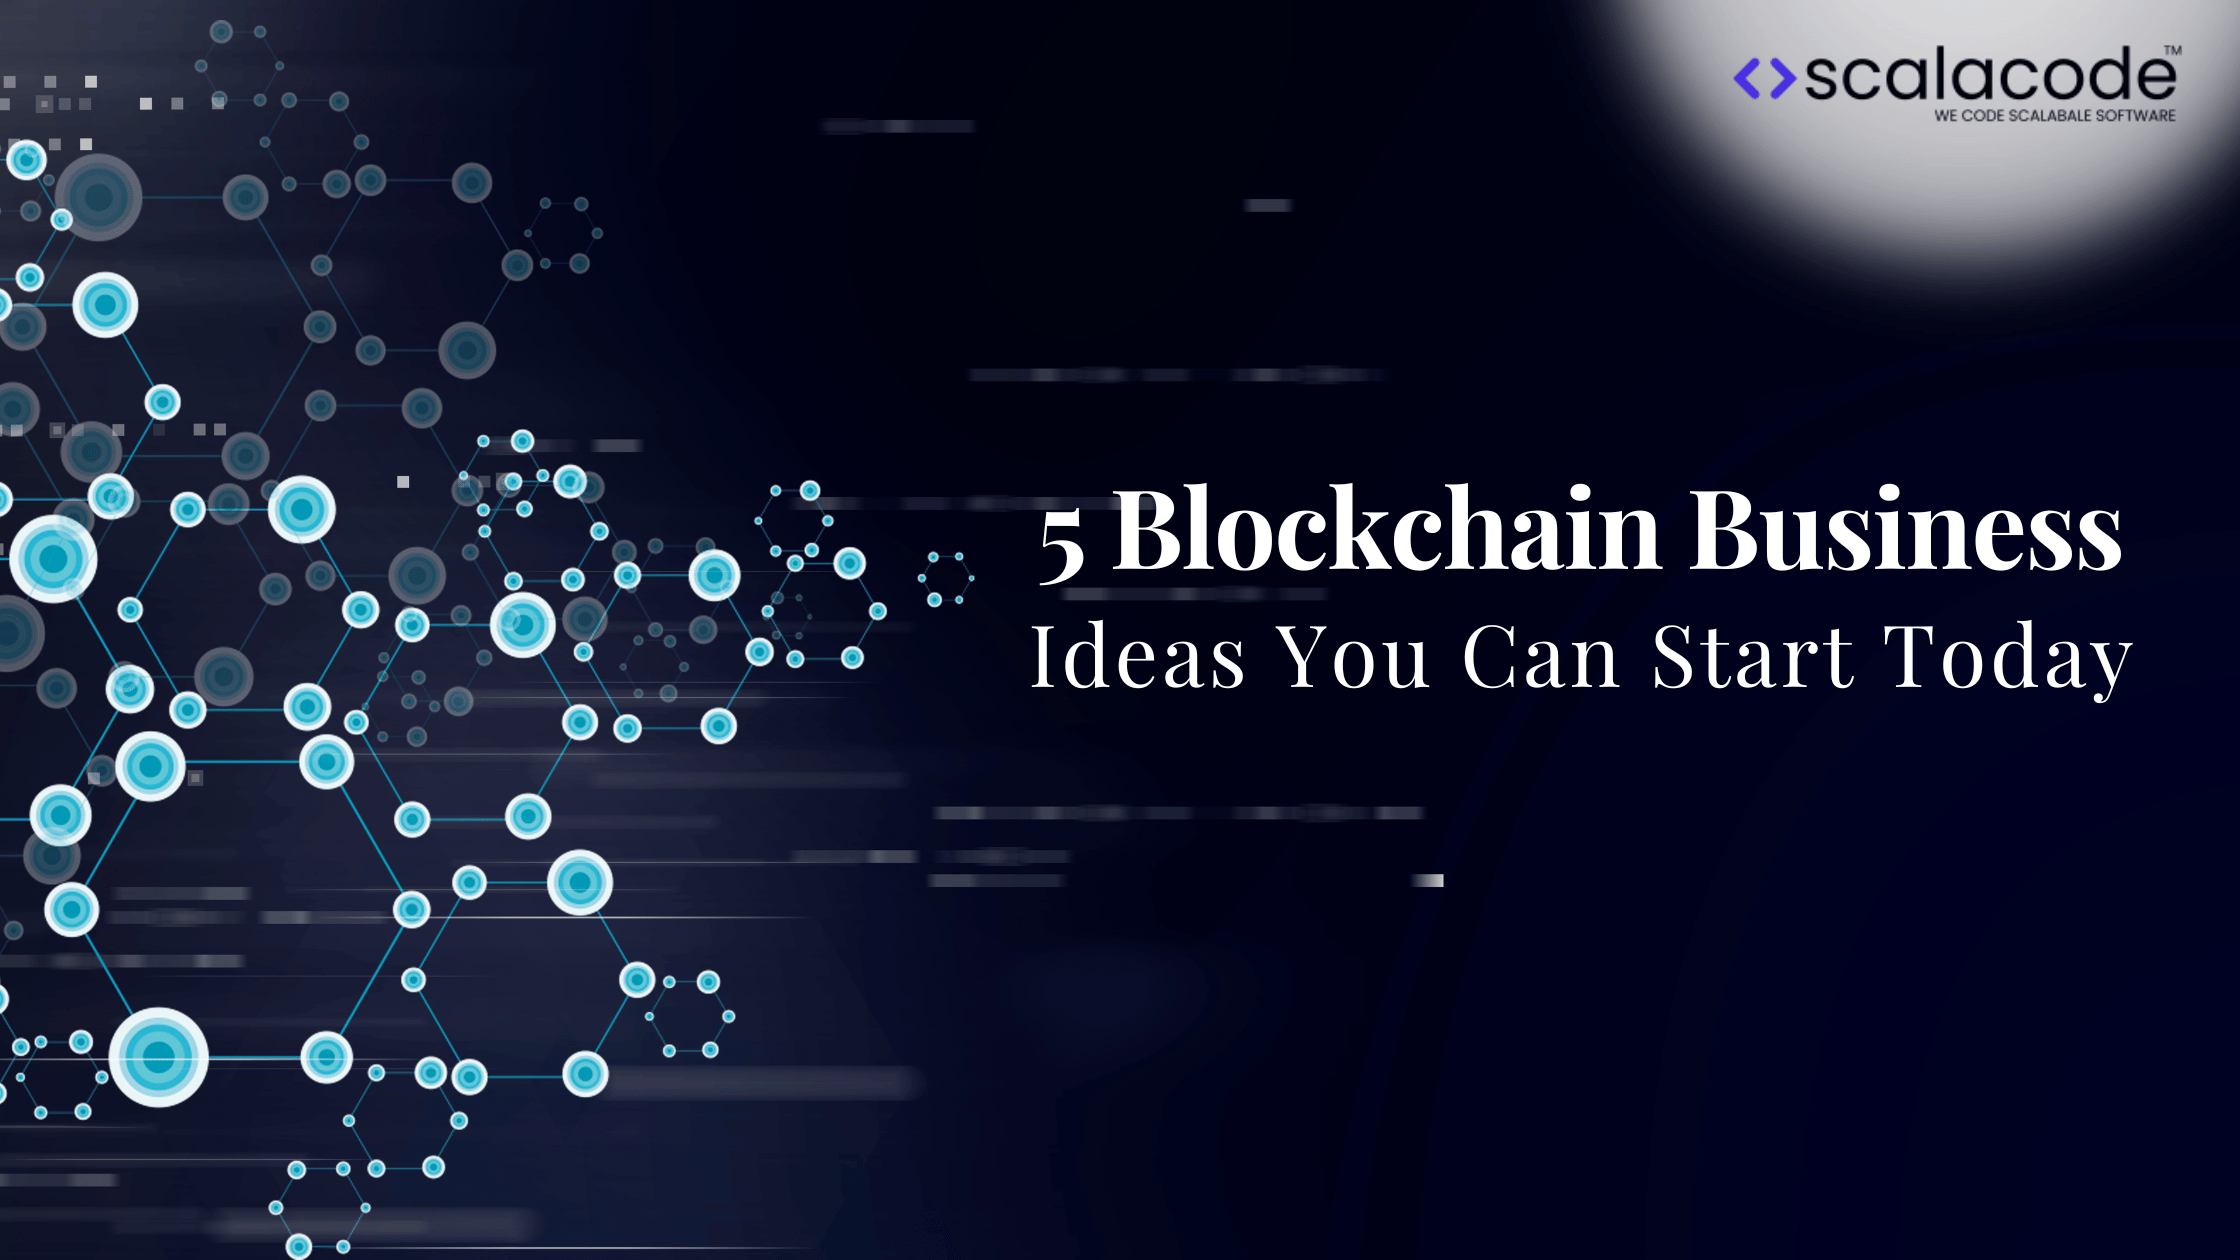 5 Blockchain Business Ideas You Can Start Today